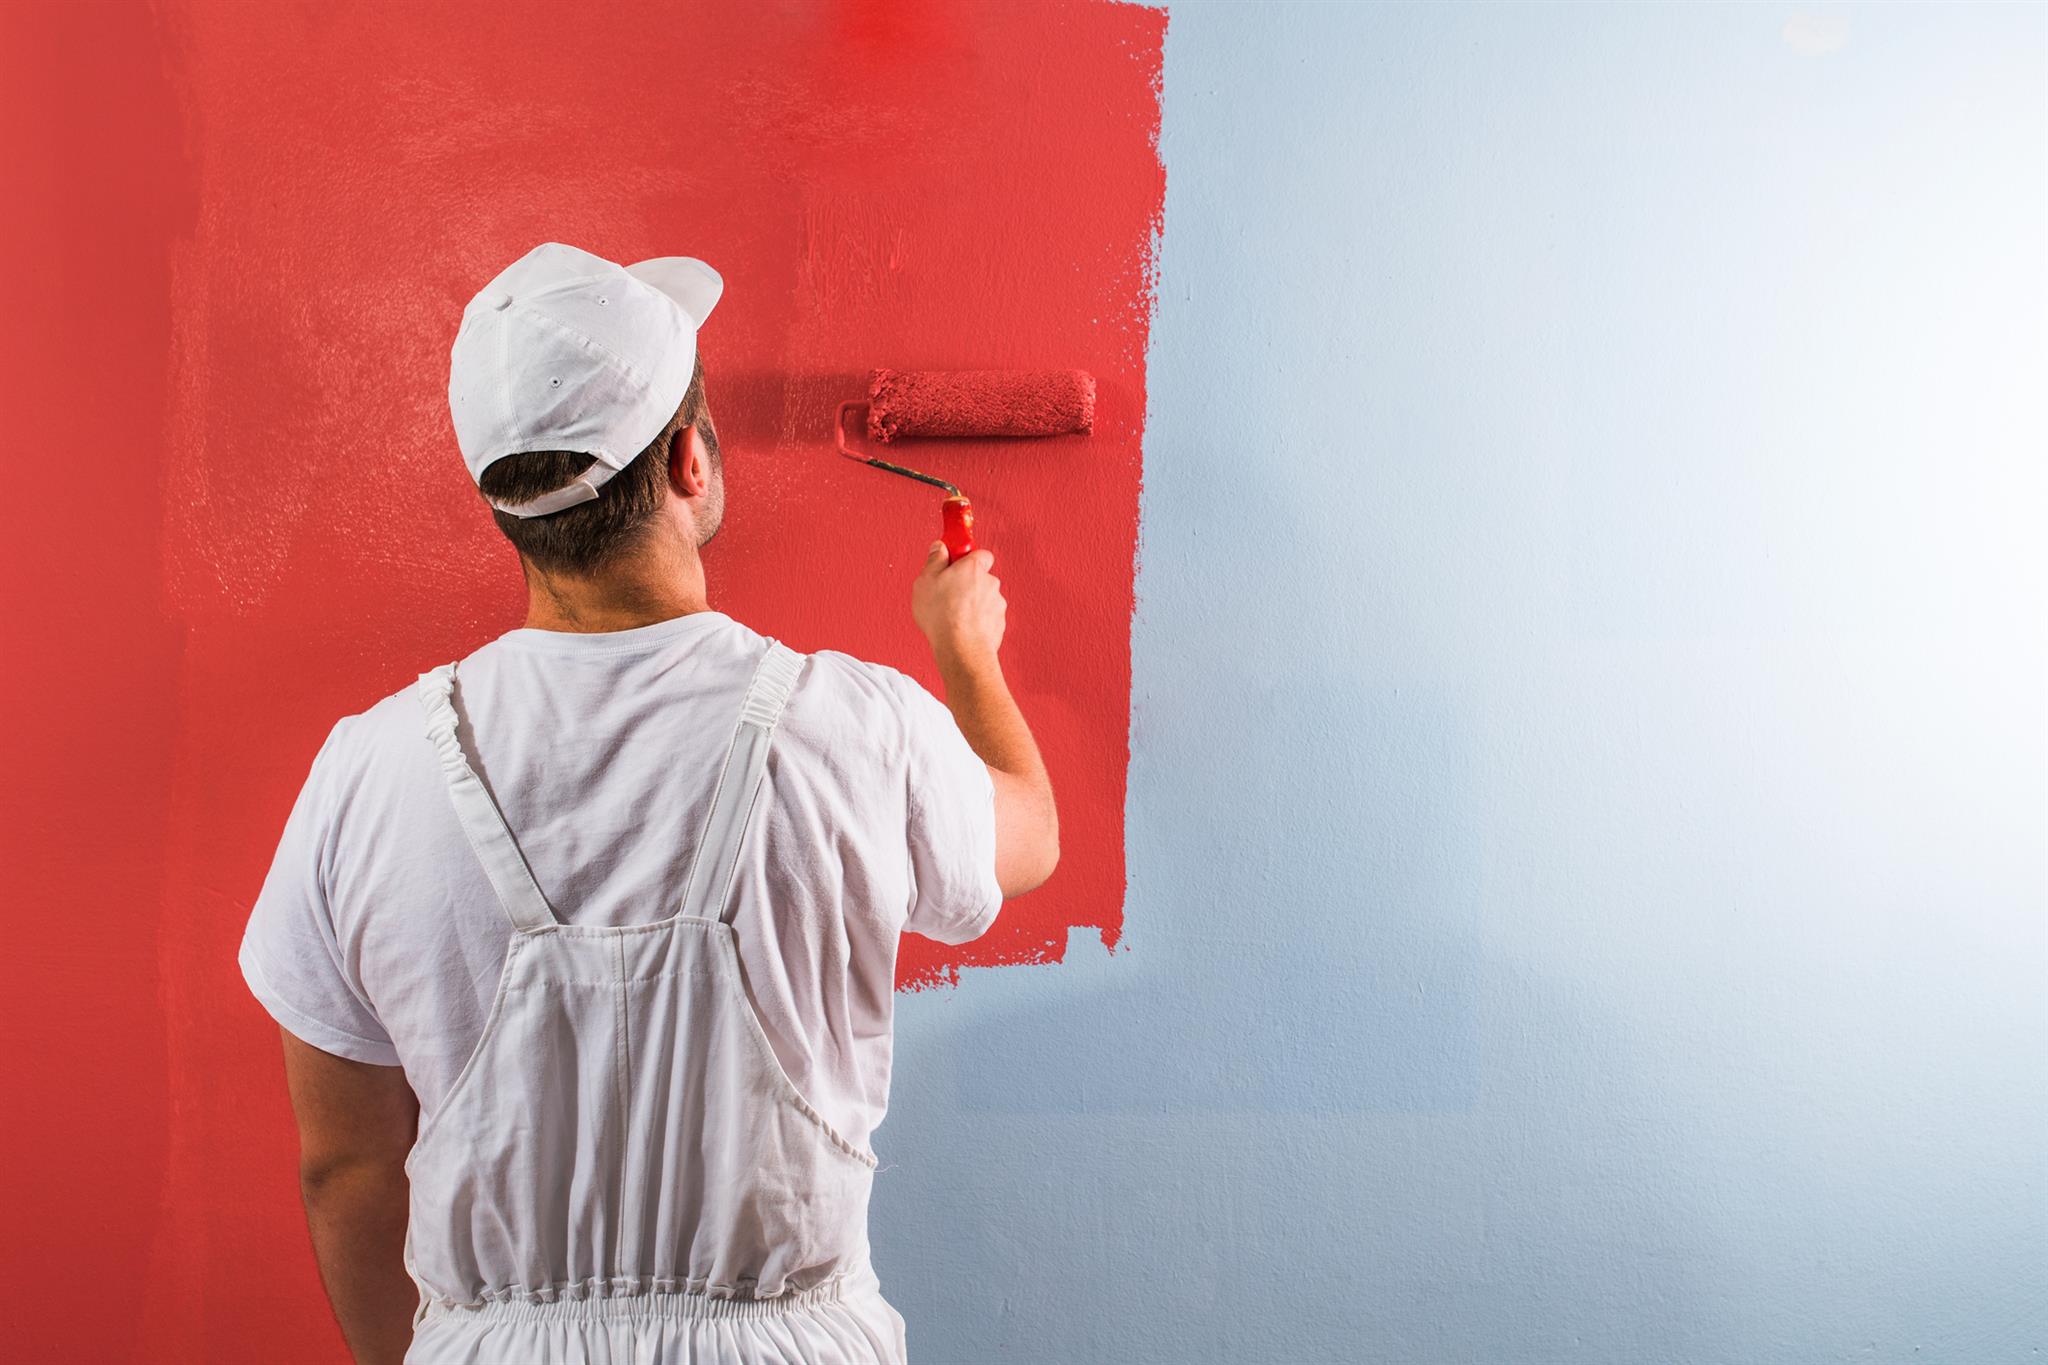 Essential information to check whilst acquiring the painting Adelaide service